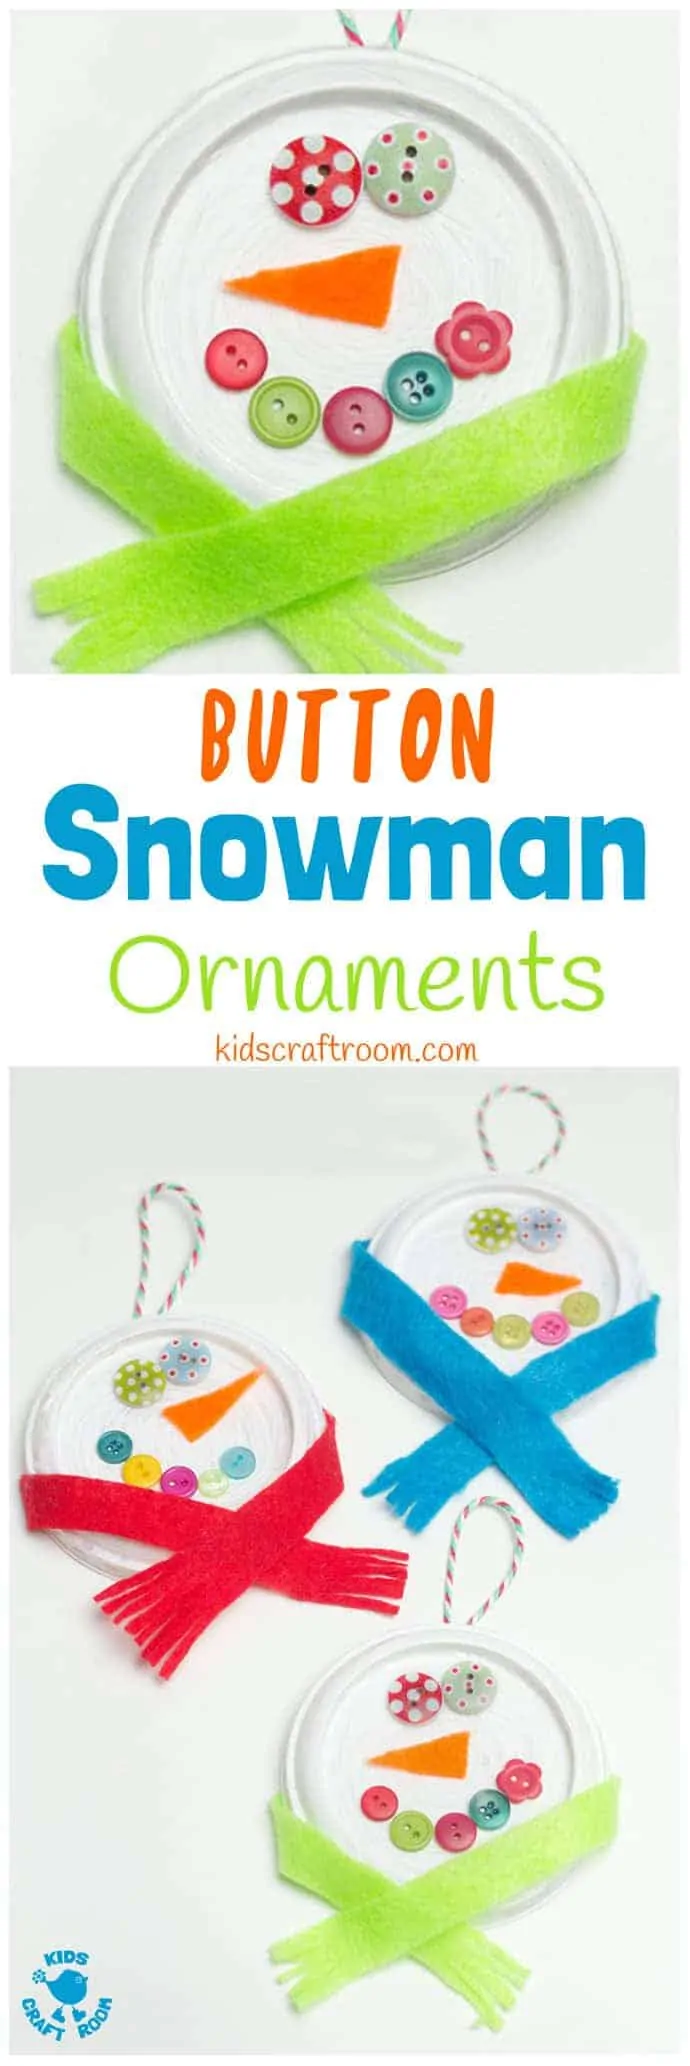 BUTTON SNOWMAN ORNAMENTS - Button eyes and snug scarves make these the cutest snowman craft for kids to make this Winter. A thrifty recycled Christmas and Winter craft for kids. #snowman #snowmancrafts #buttoncrafts #kidscrafts #ornaments #christmas #christmascrafts #winter #wintercrafts #recycledcrafts #wintercraftsforkids #craftideasforkids #kidscraftroom